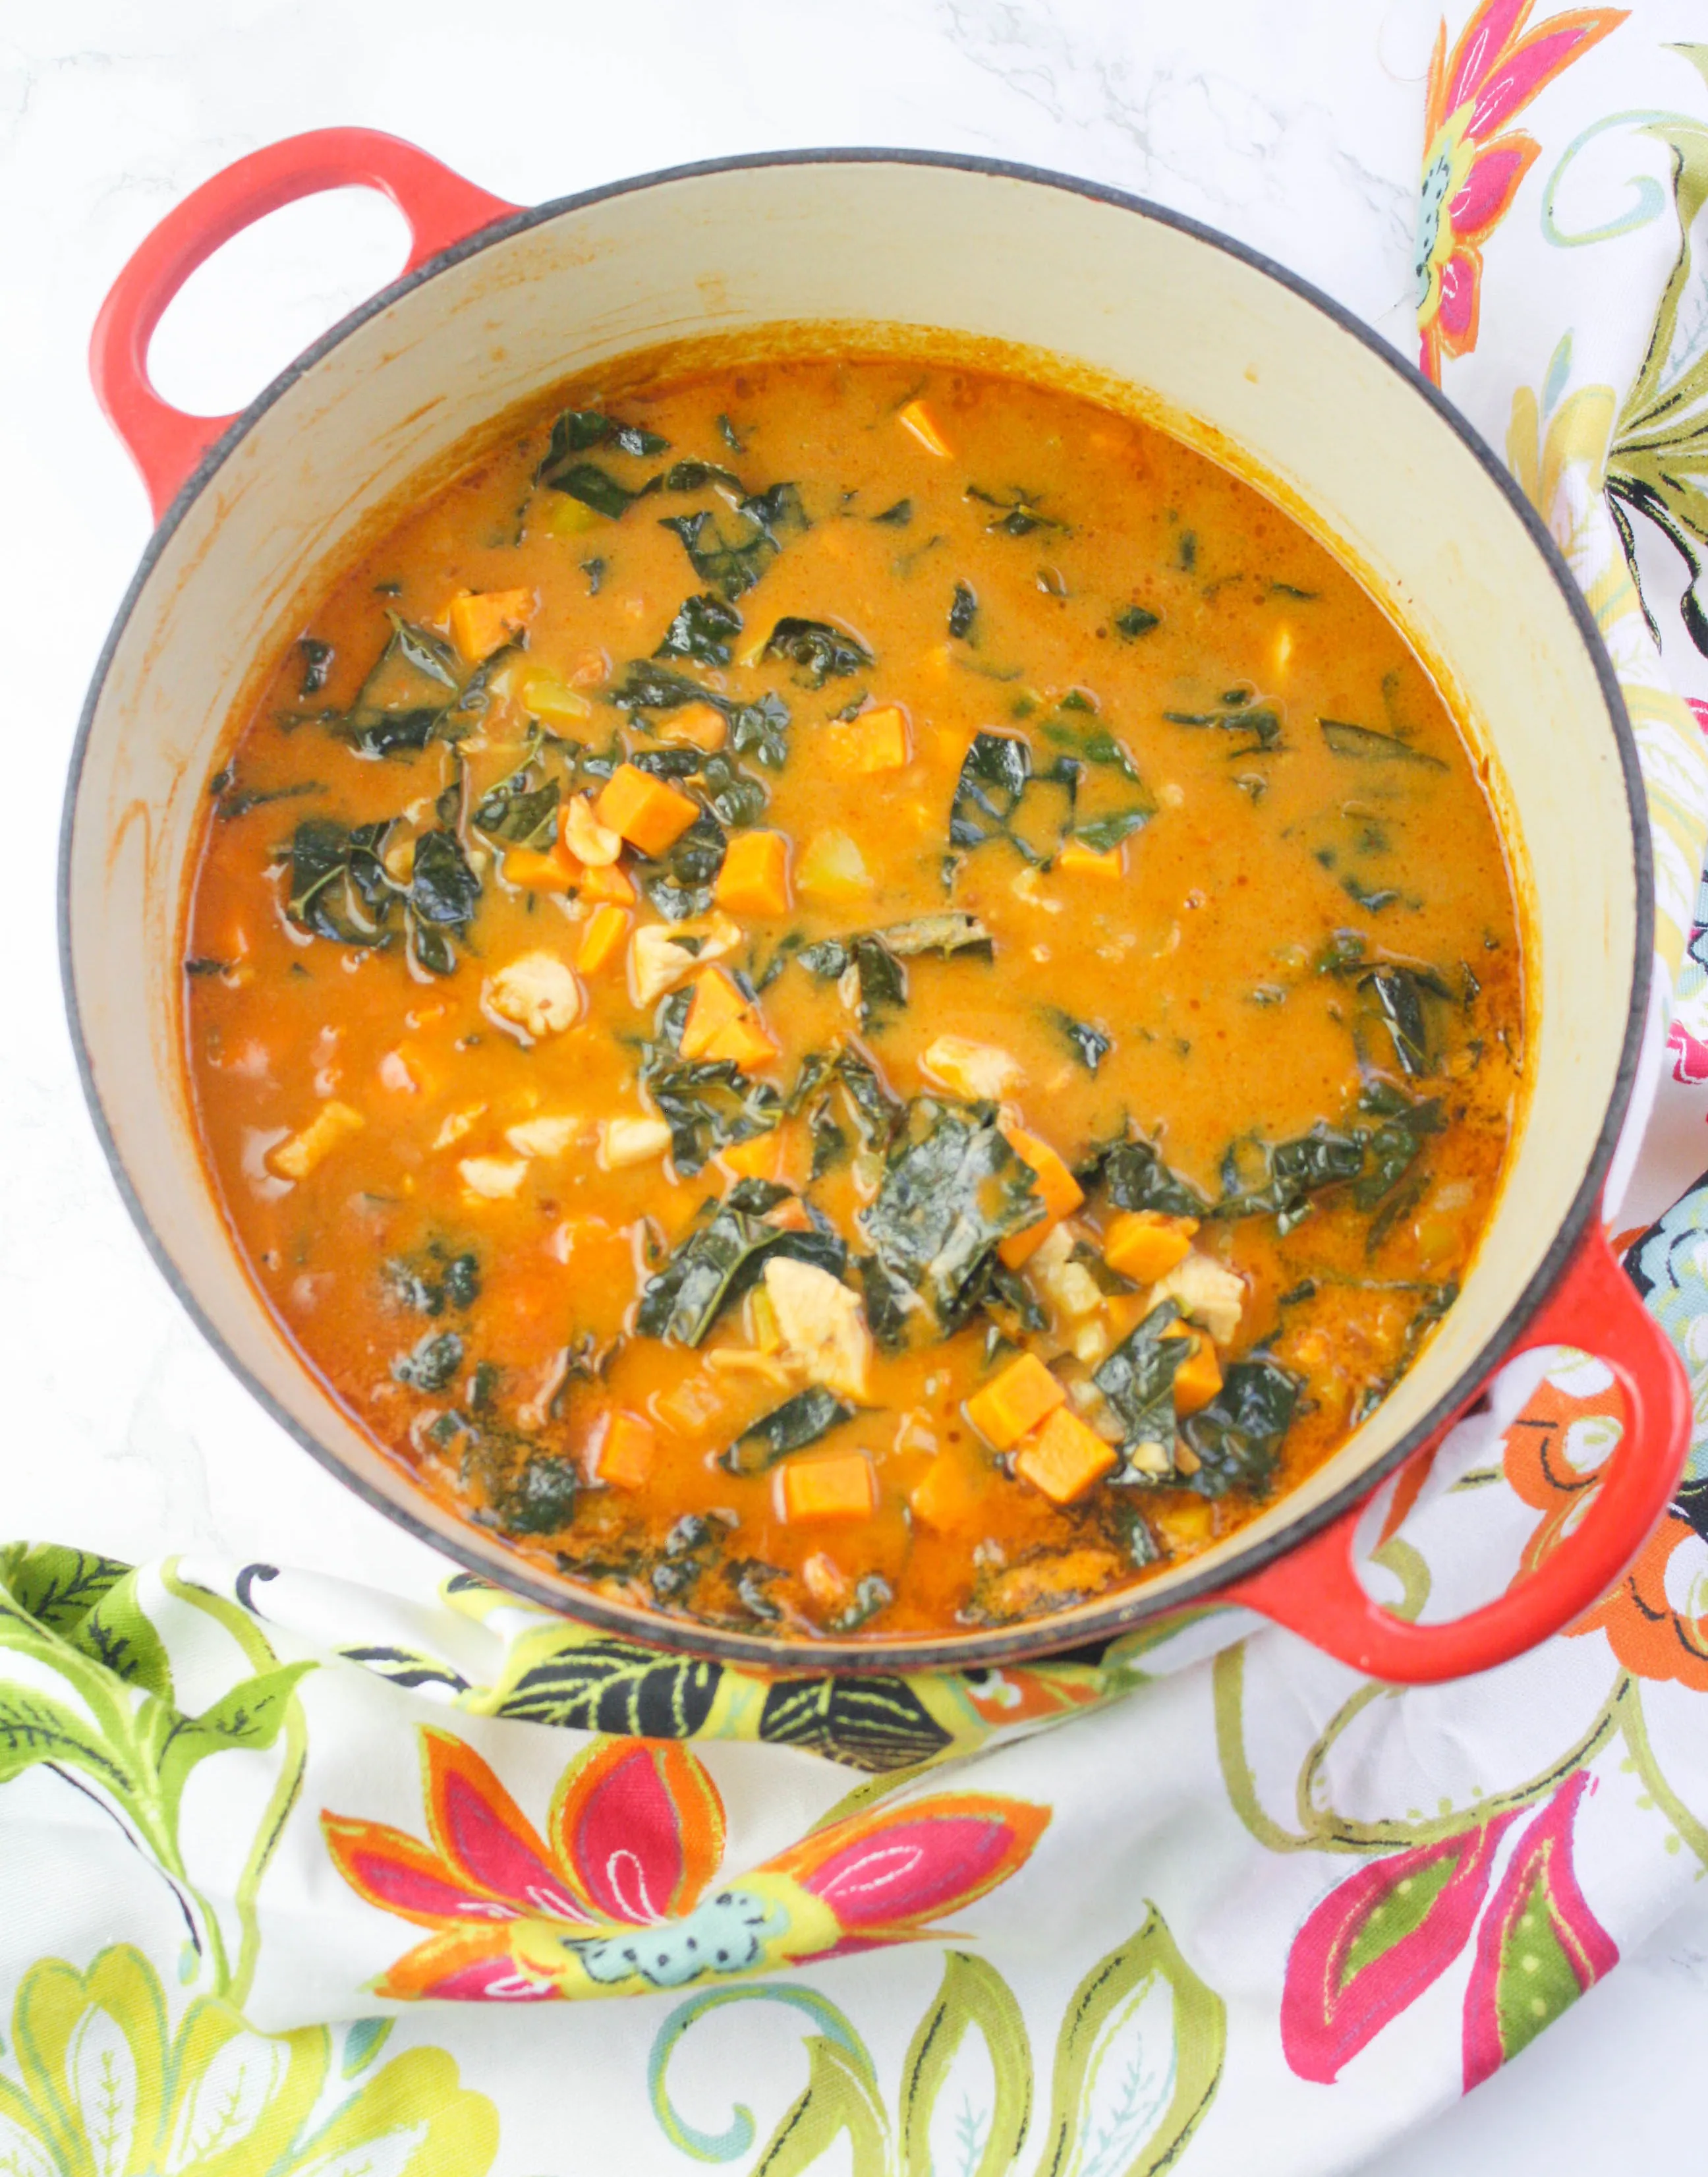 West African Peanut Stew is a delicious dish for a cold night. Grab your big pot to make a batch of West African Peanut Stew.